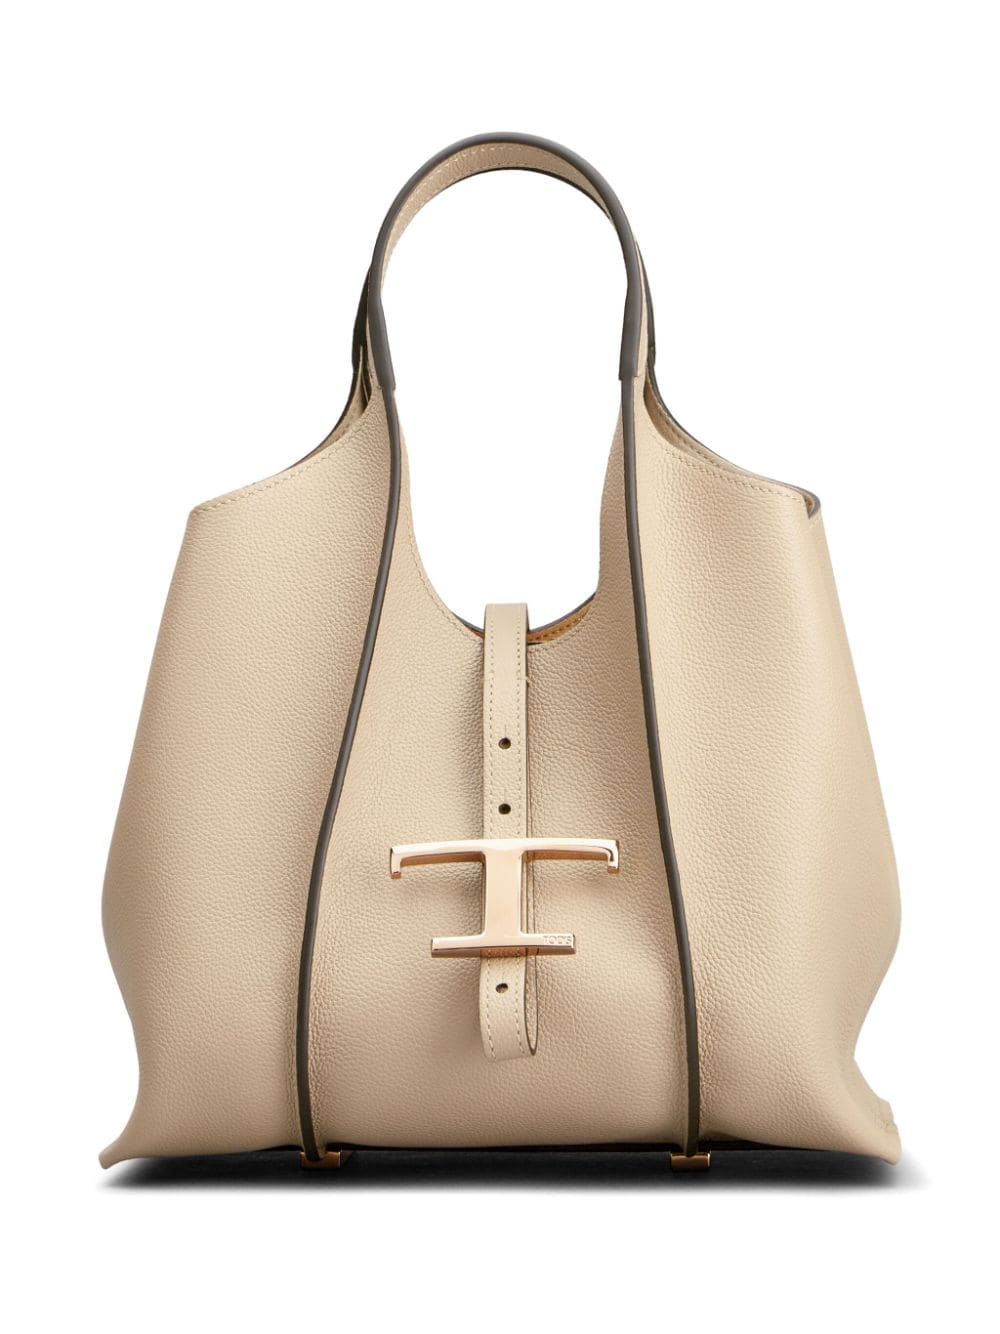 Beige Grained Leather Handbag with Gold-Tone Accents and Circular Handles